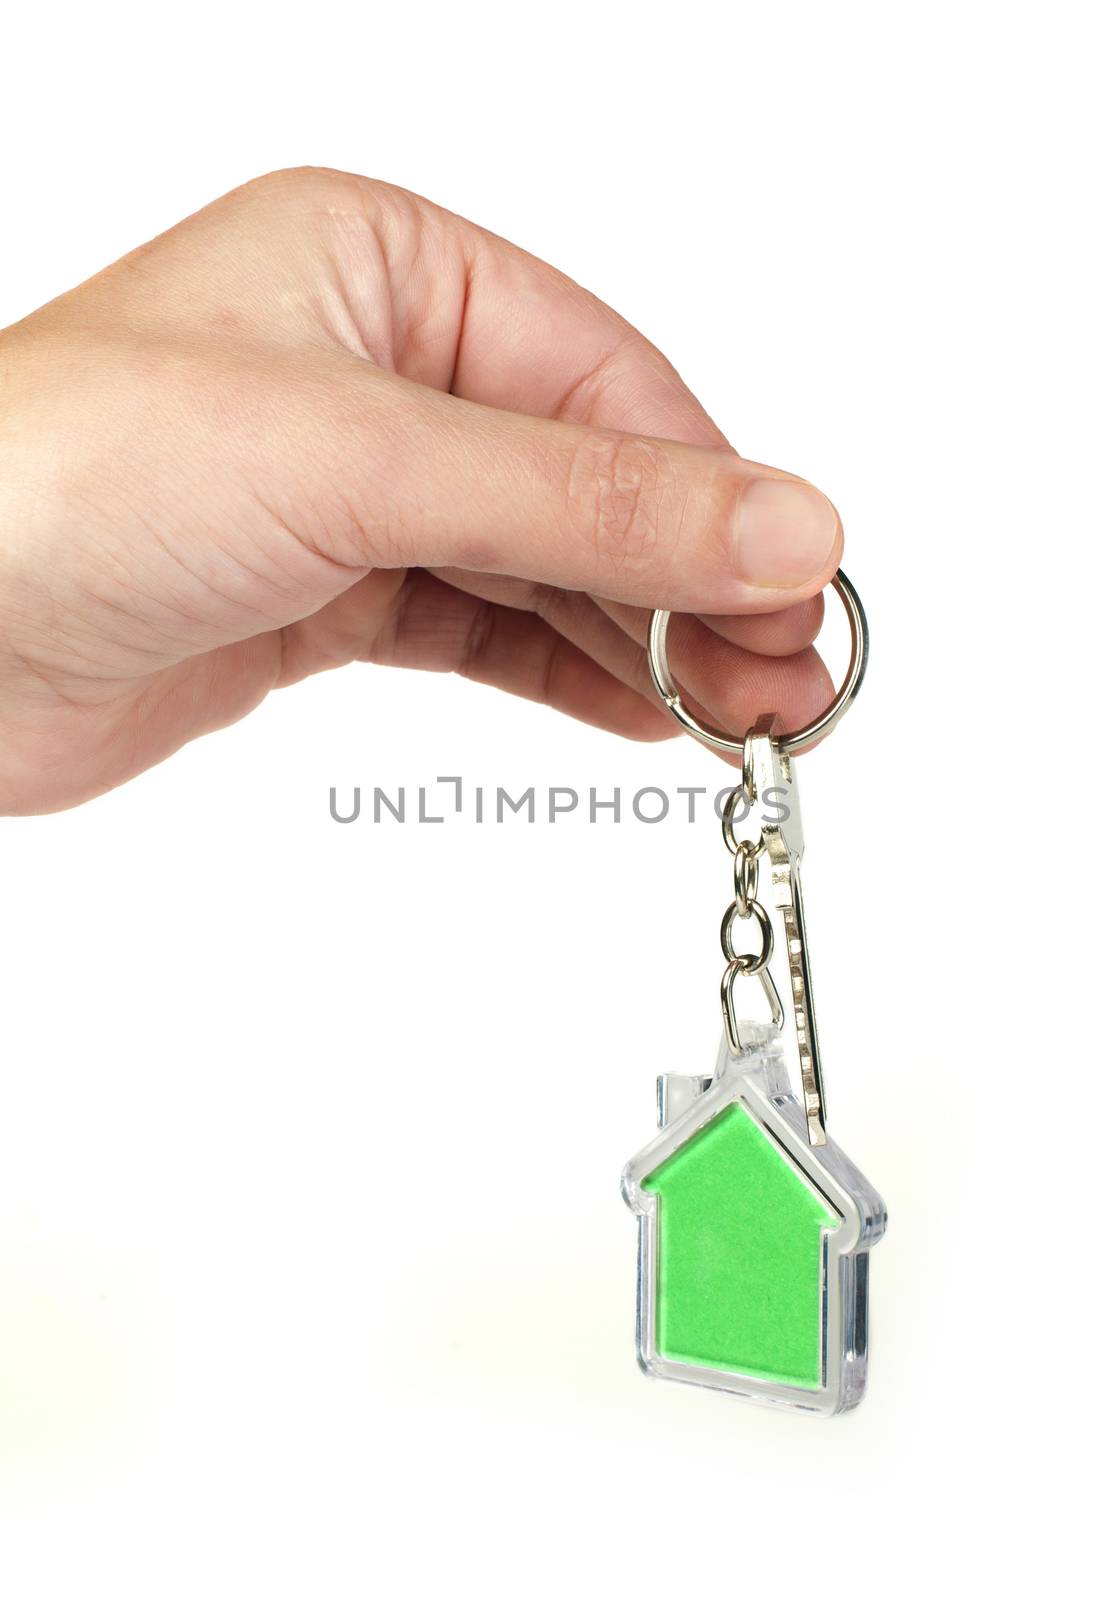 Keychain with figure of green house. Hand holding key and Keychain.